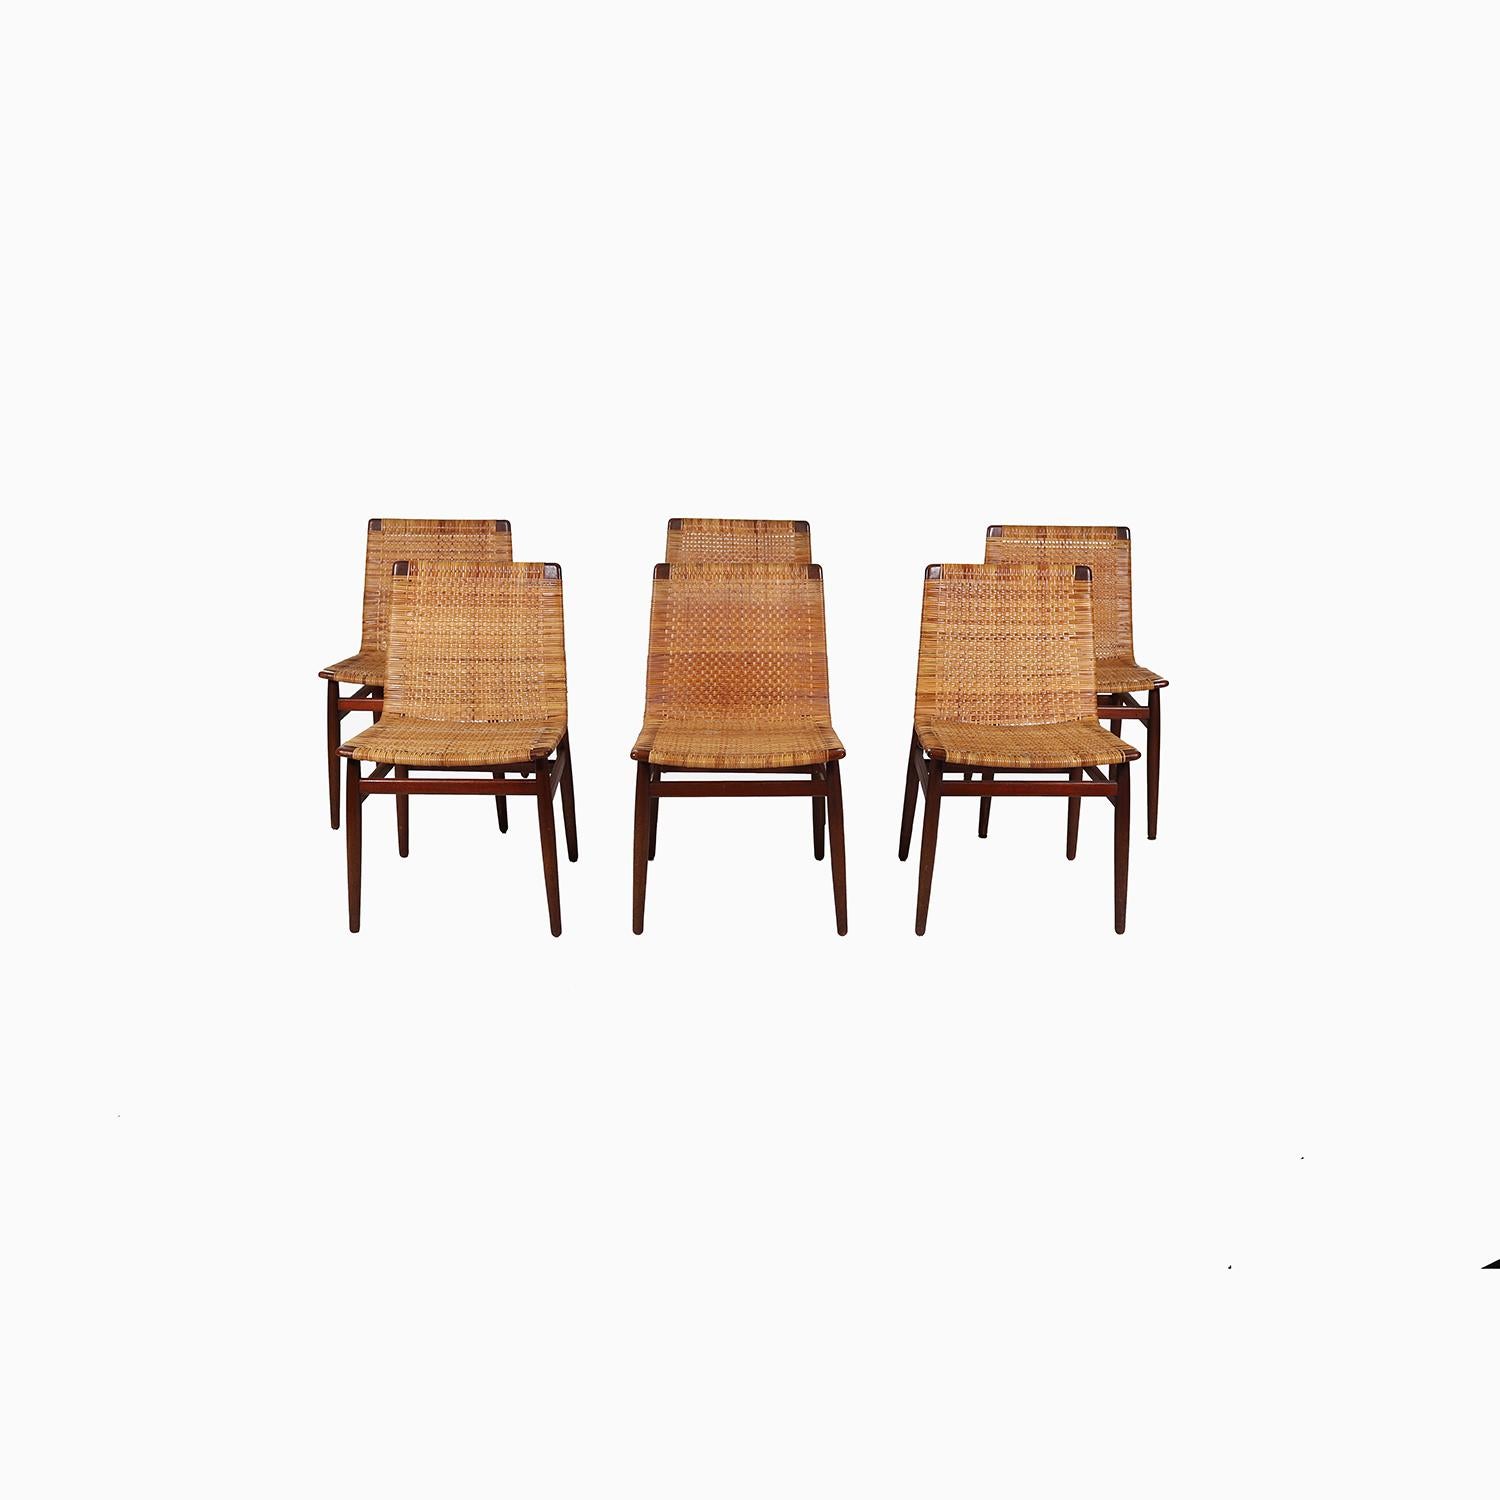 Set of six rare teak and binder cane dining chairs designed by Jørgen Høj and produced by Thorald Madsen. Restoration of the frames and cane will be completed upon purchase. Lead time for re caning chairs is 3-5 months after purchase. Please reach